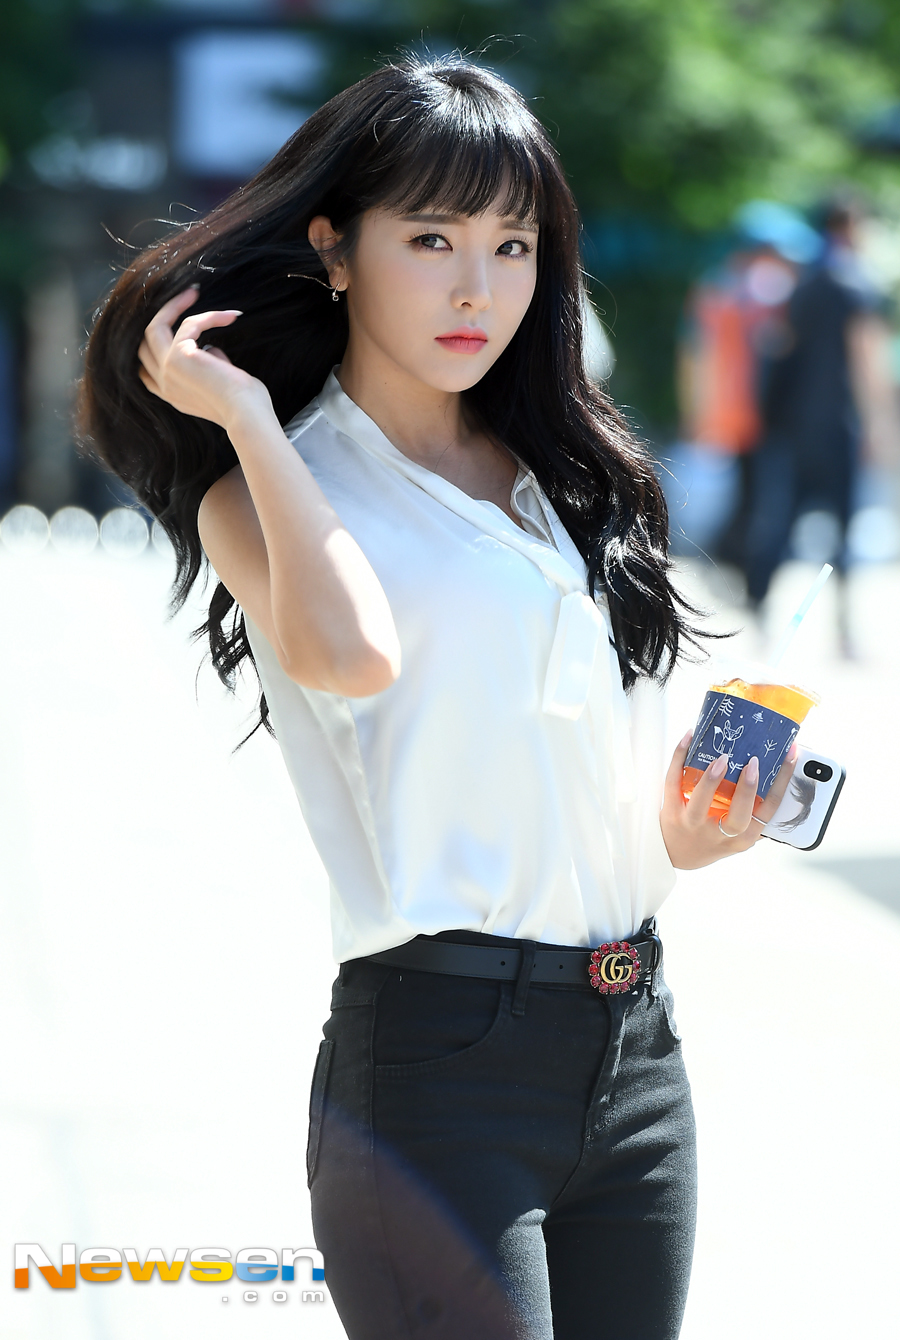 KBS 2TV Happy Together 3 recording was held at the Yeouido-dong KBS annex in Yeongdeungpo-gu, Seoul on July 7th.On that day, Hong Jin-young attended the recording.Jung Yu-jin